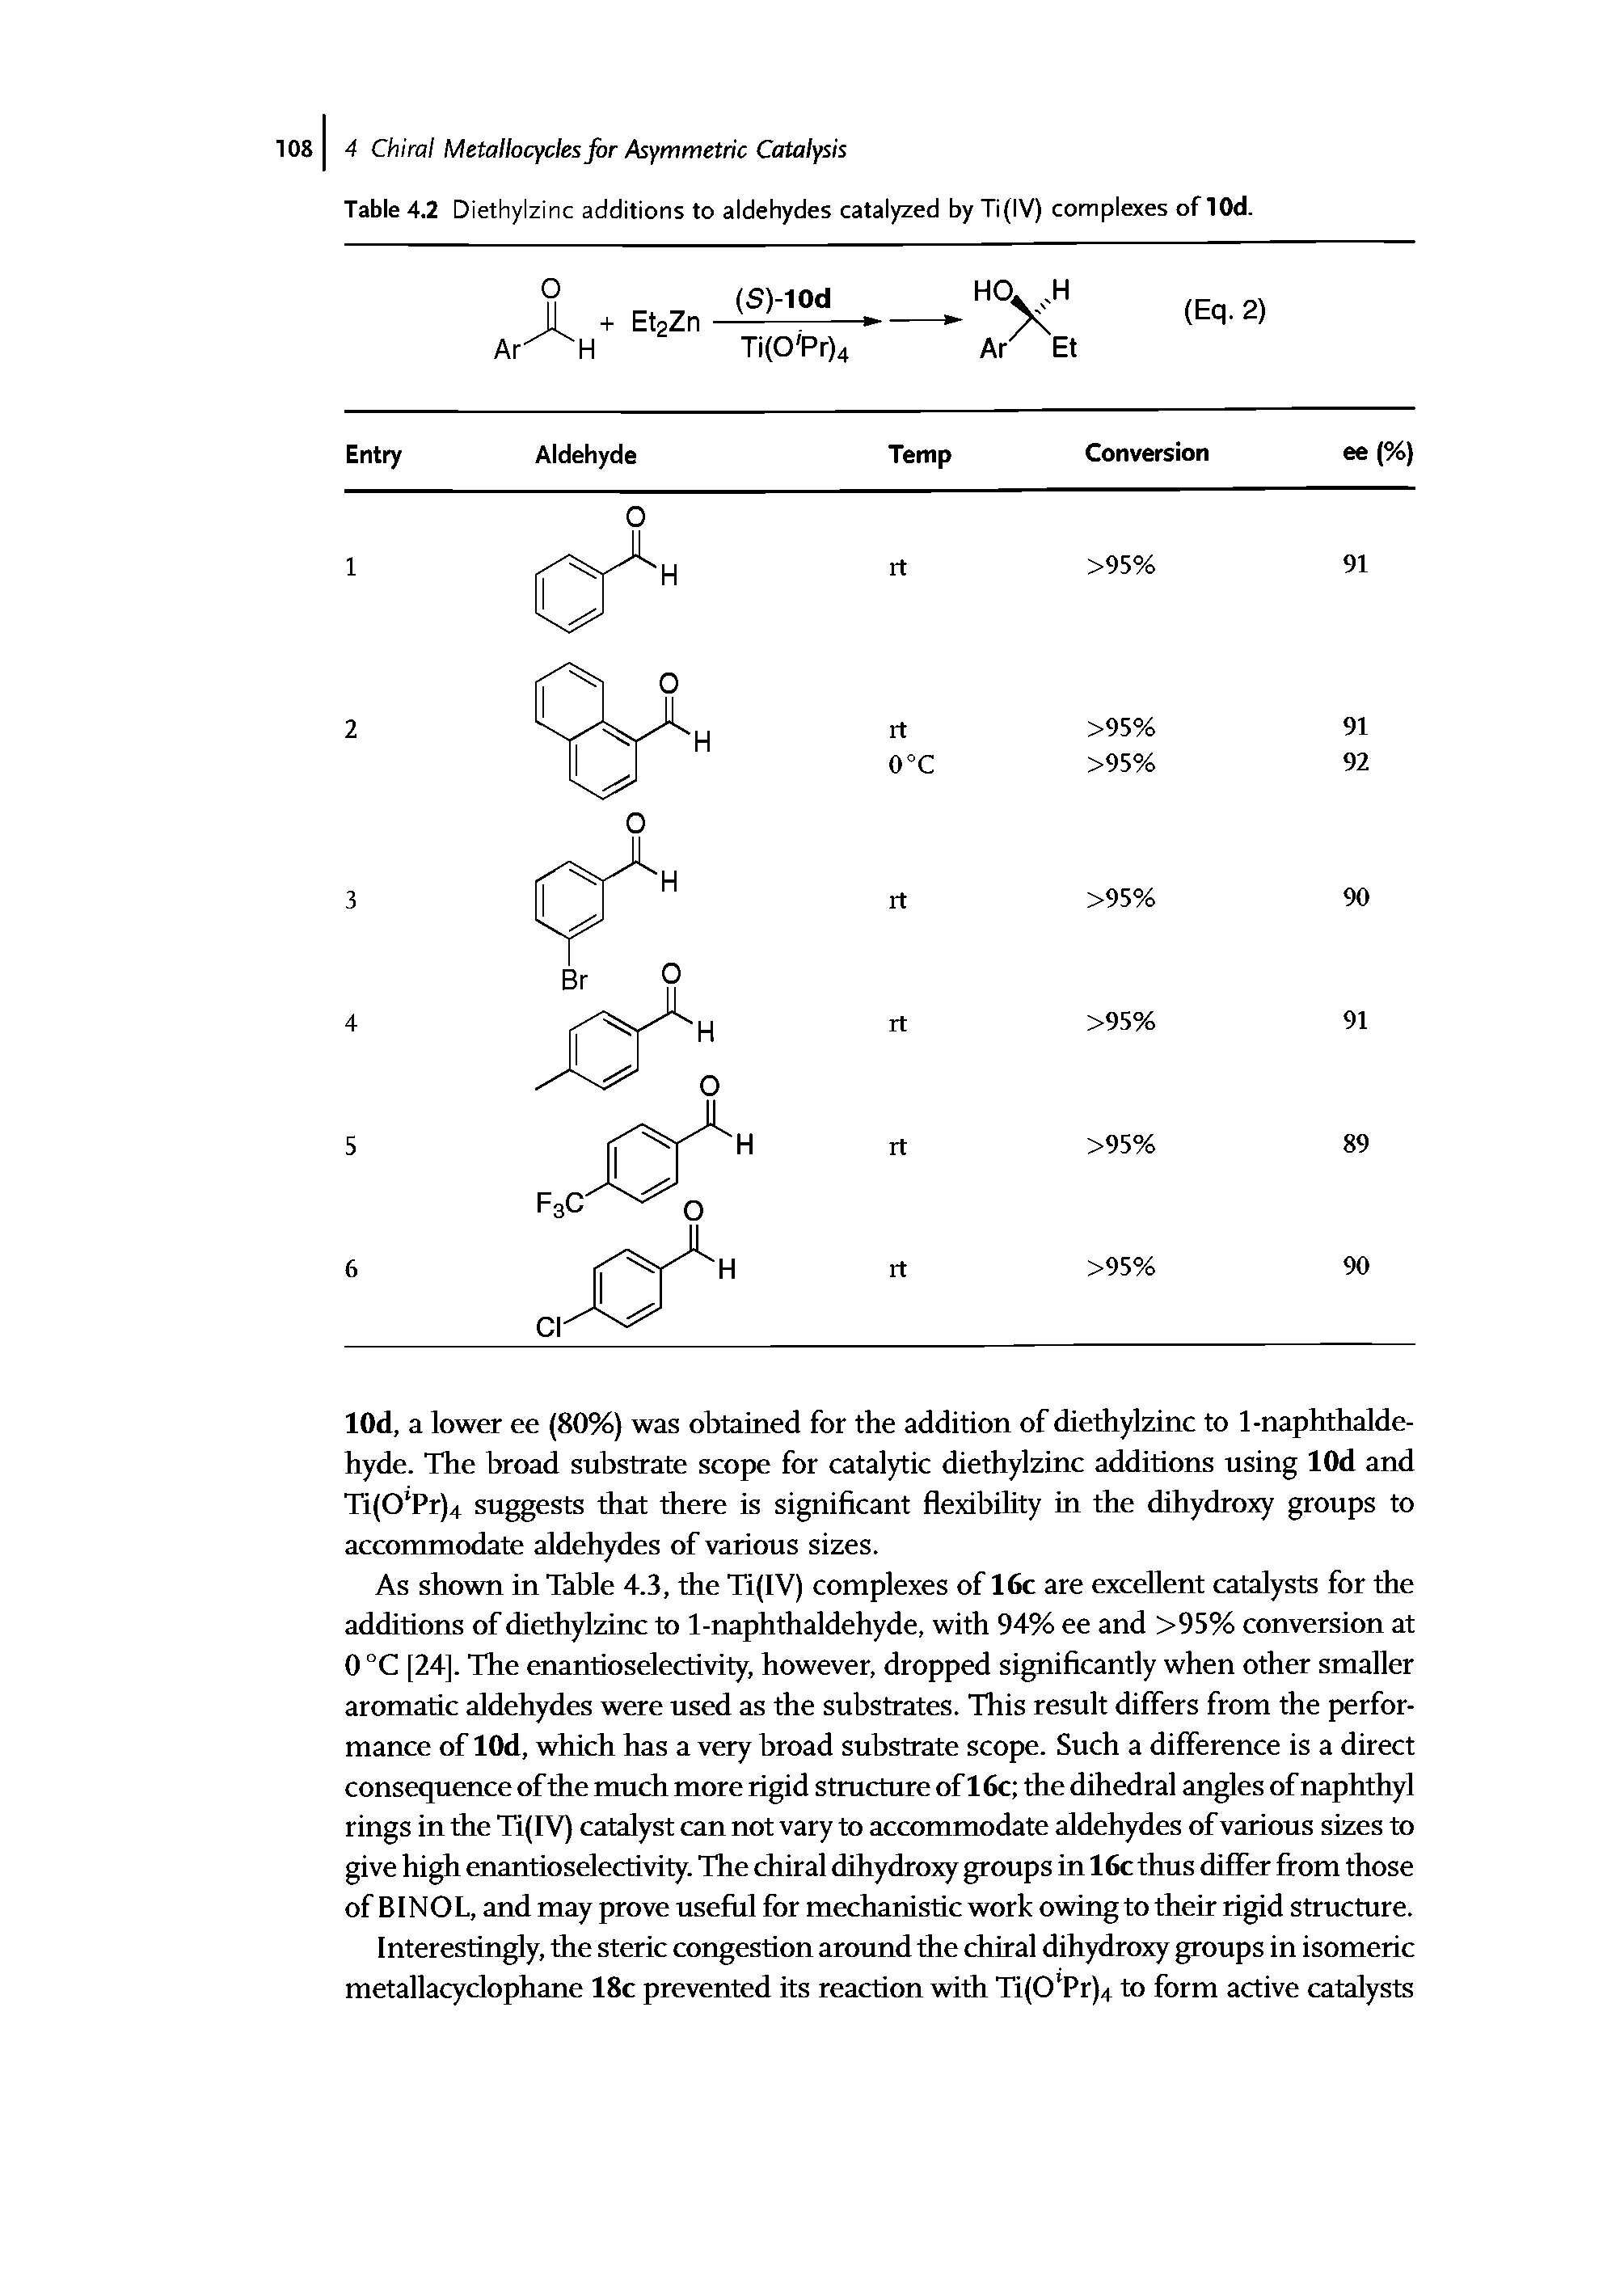 Table 4.2 Diethylzinc additions to aldehydes catalyzed by Ti(IV) complexes of lOd.